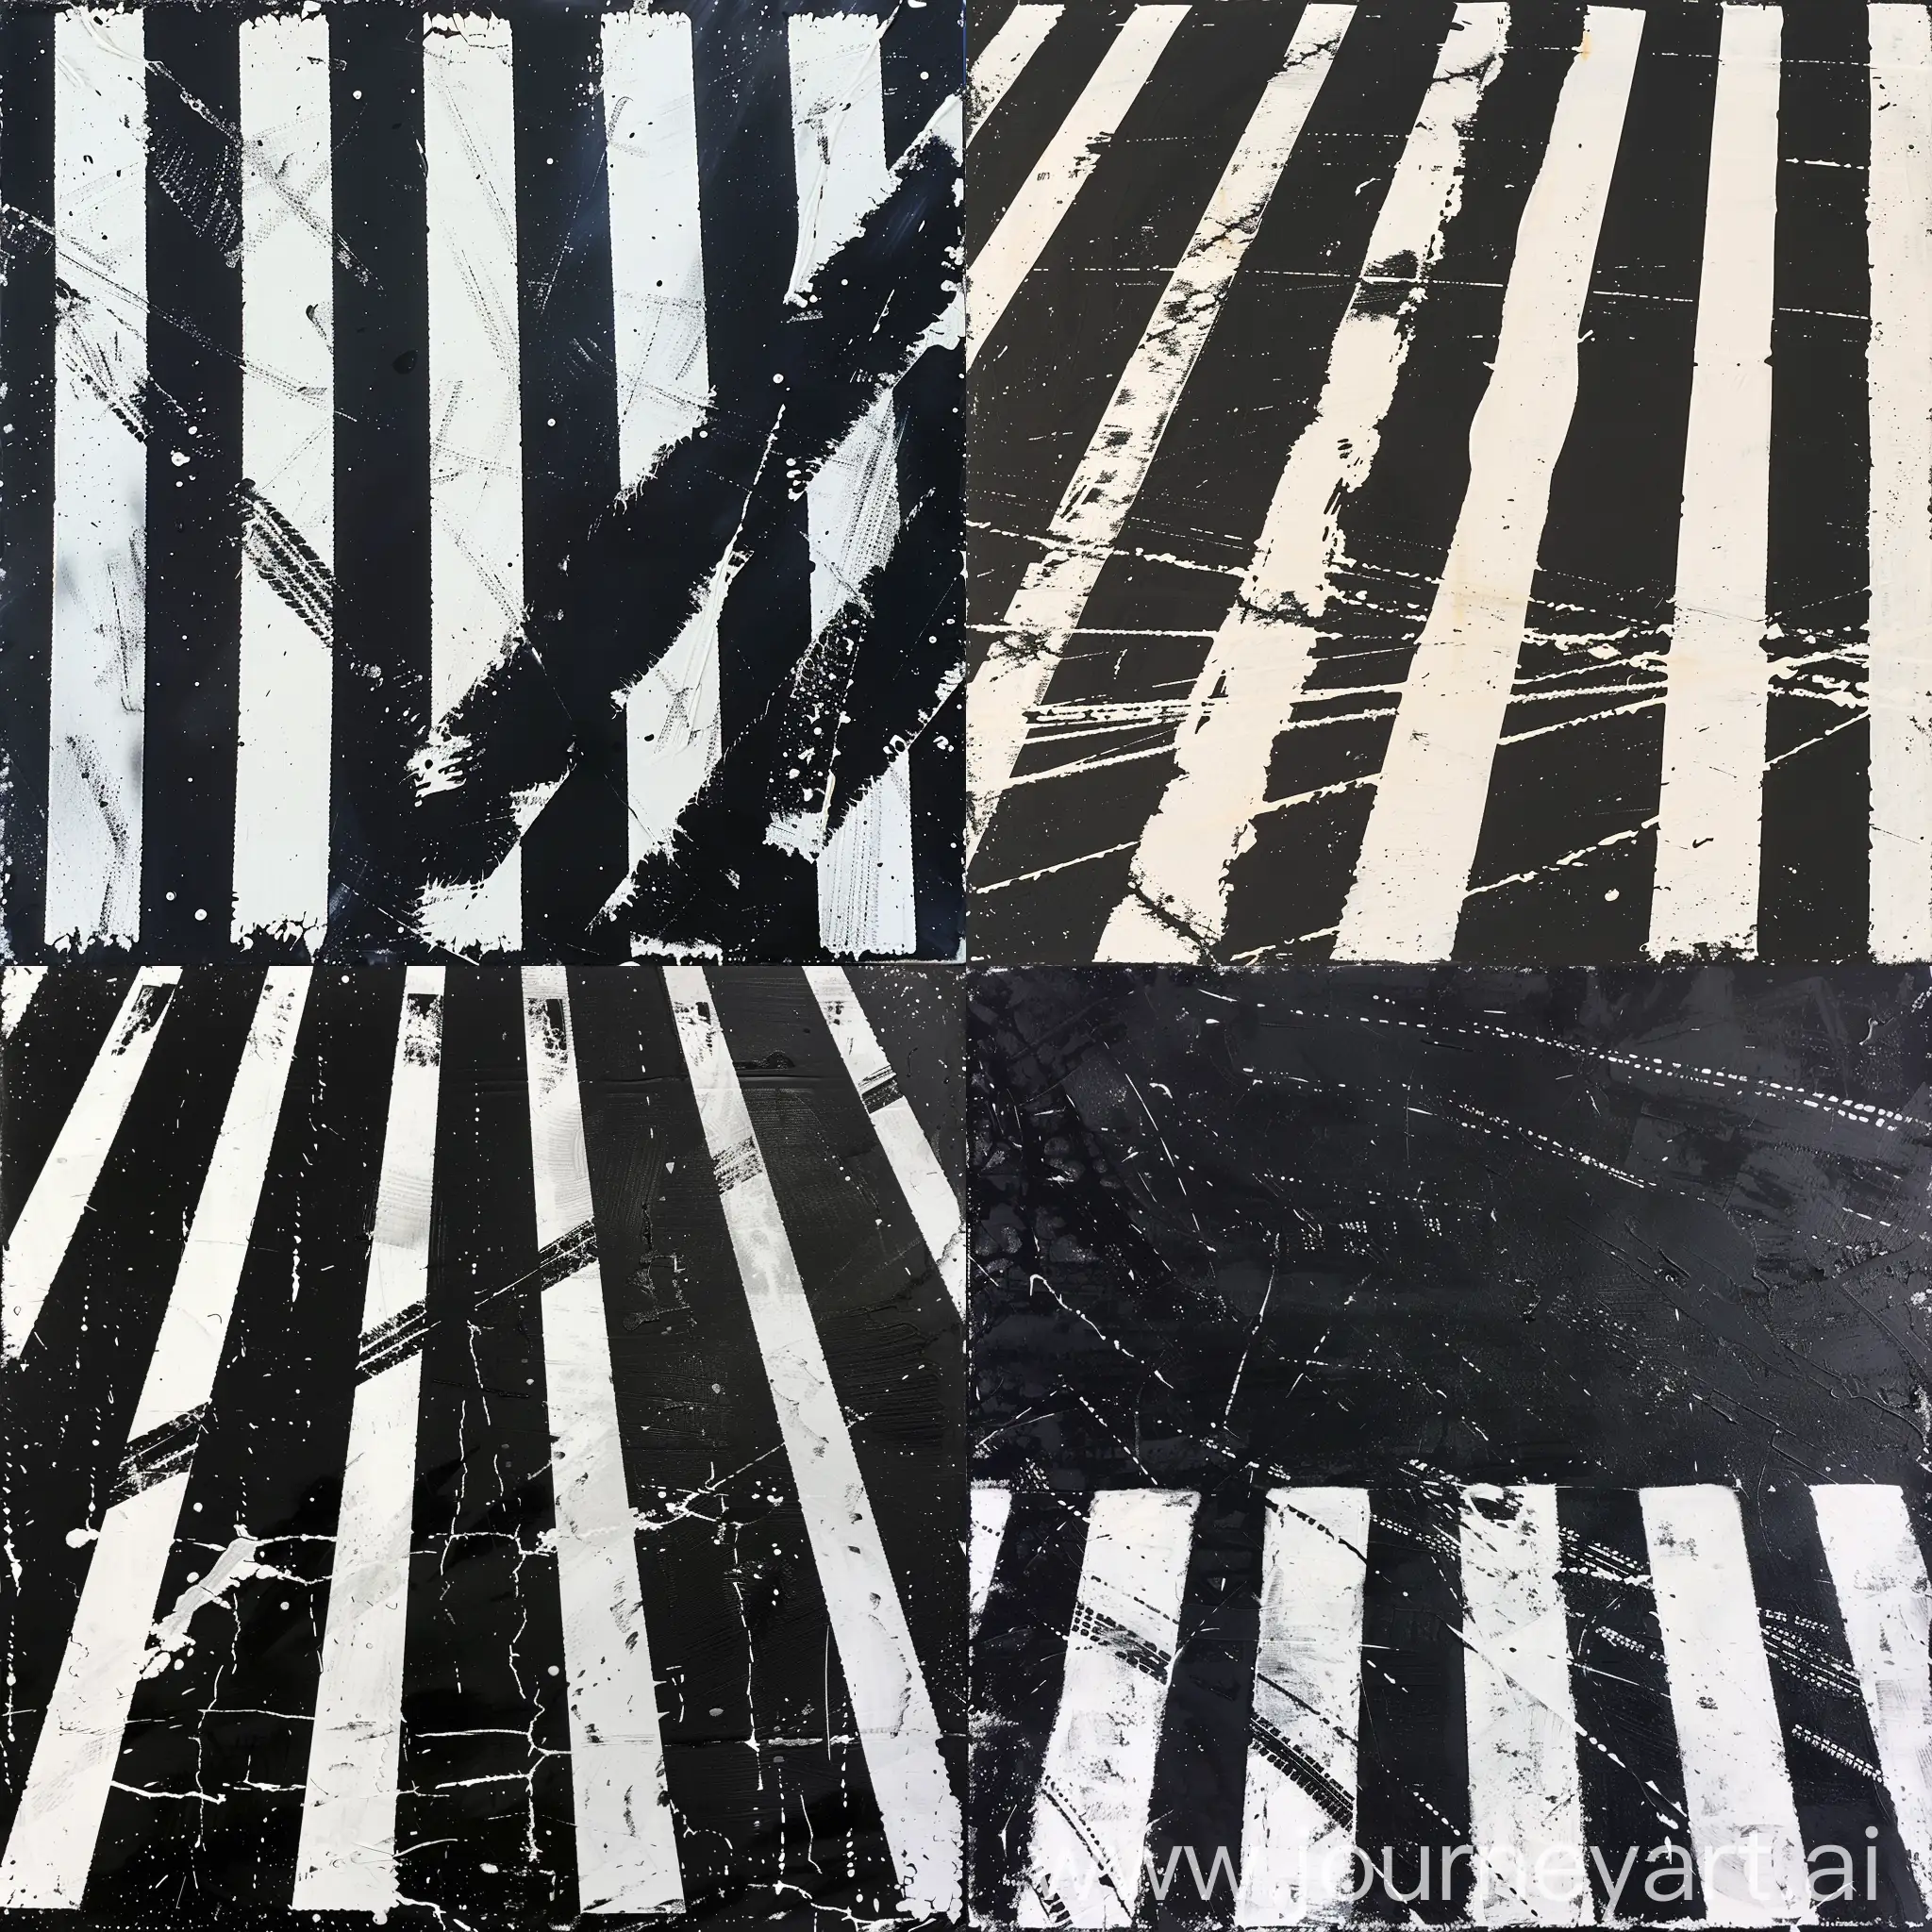 drawing on a black background with white paint, pedestrian crossing, white stripes stained with tire tracks